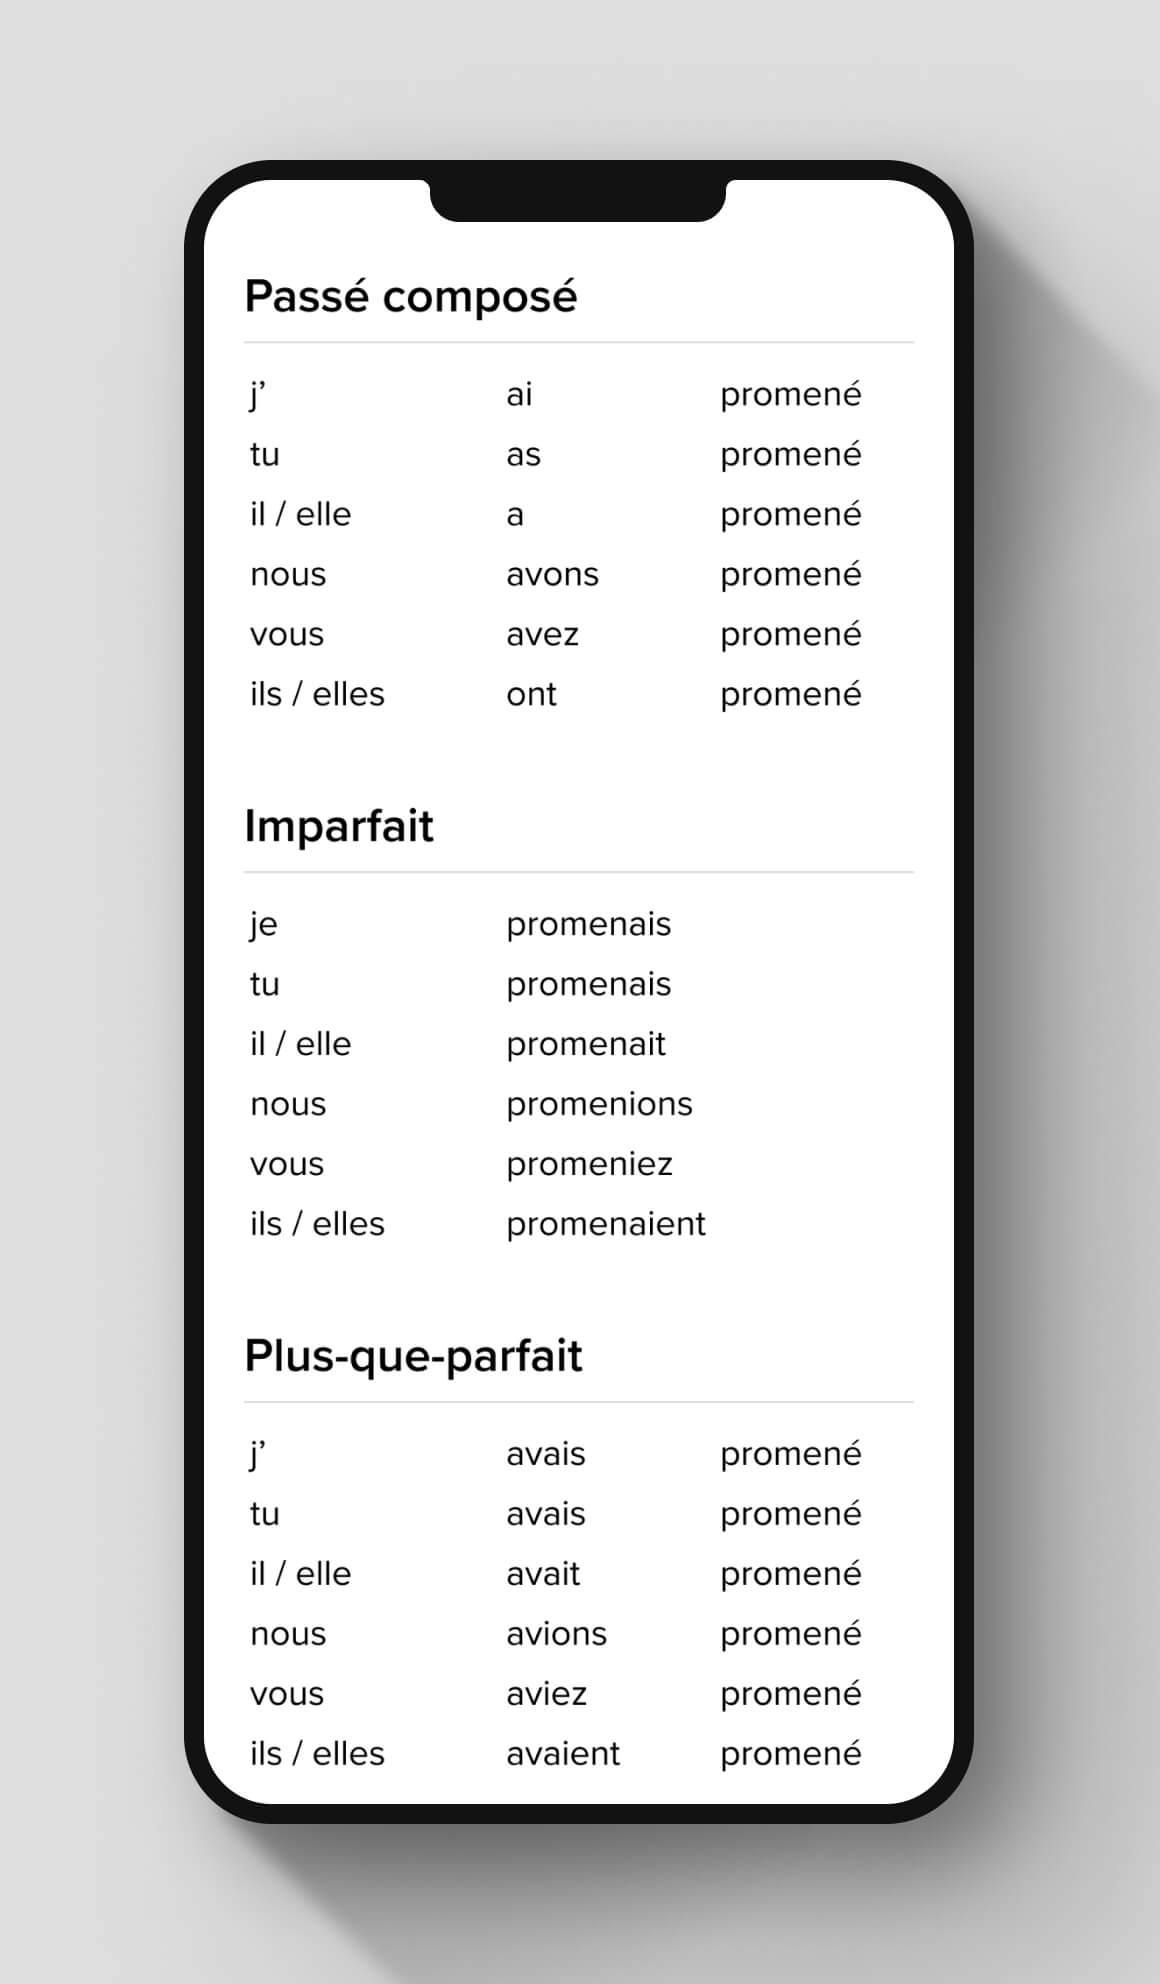 The Voilà verb page. Featured verb is to walk. Conjugations for this verb are outlined across various verb tenses.